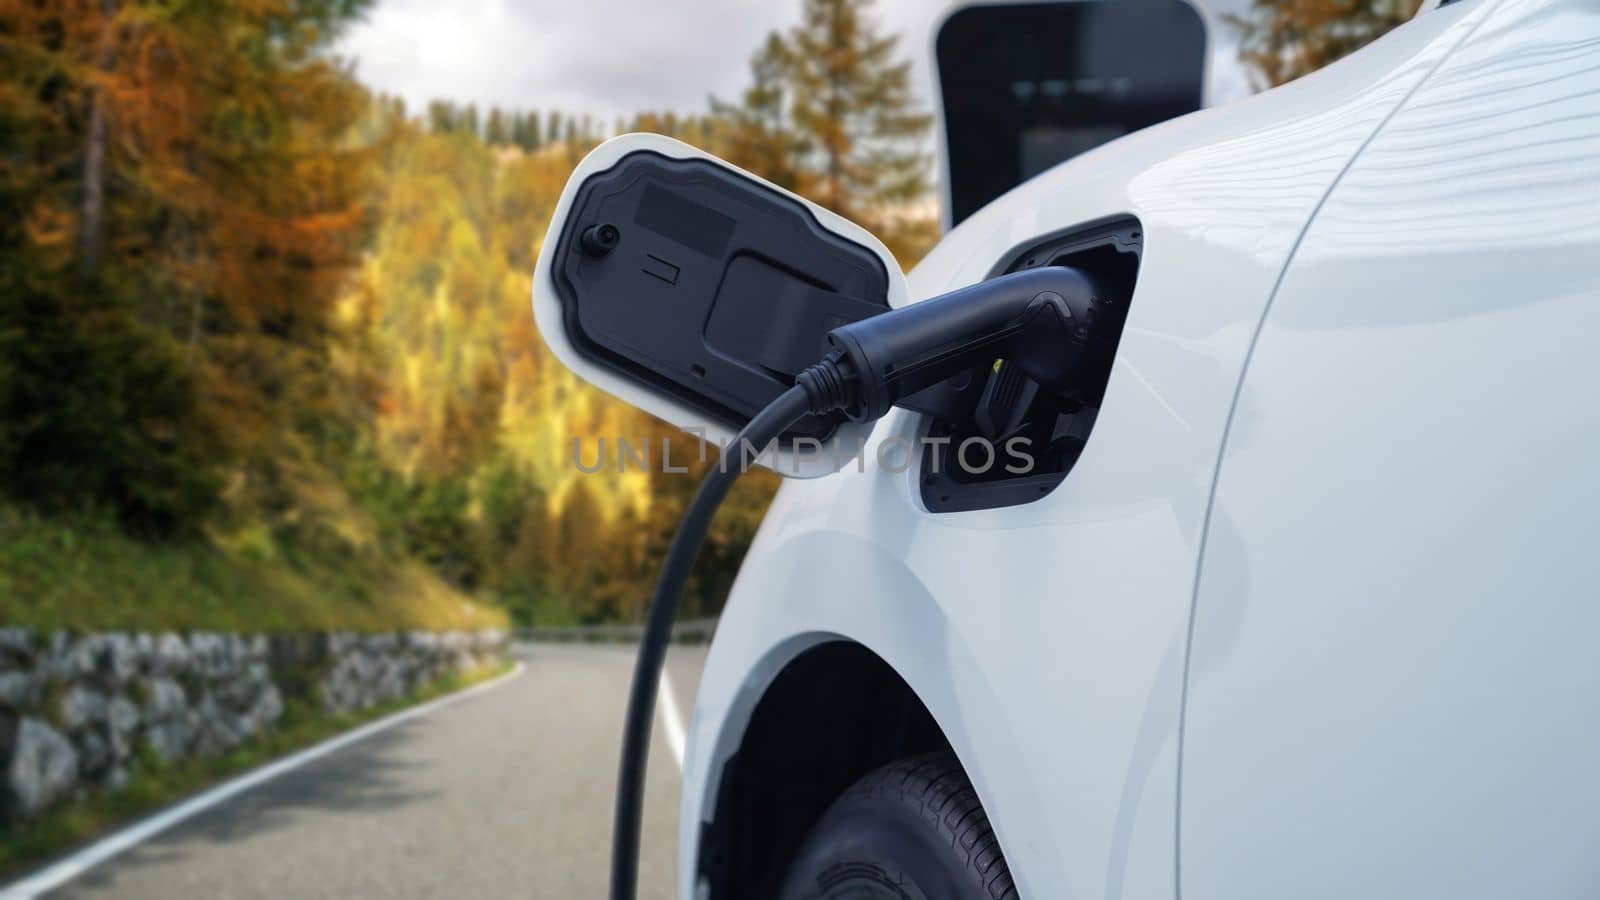 Progressive travel concept of electric vehicle stop to recharge energy from charging station at remote area before reach destination, EV car powered by renewable and clean energy for green environment